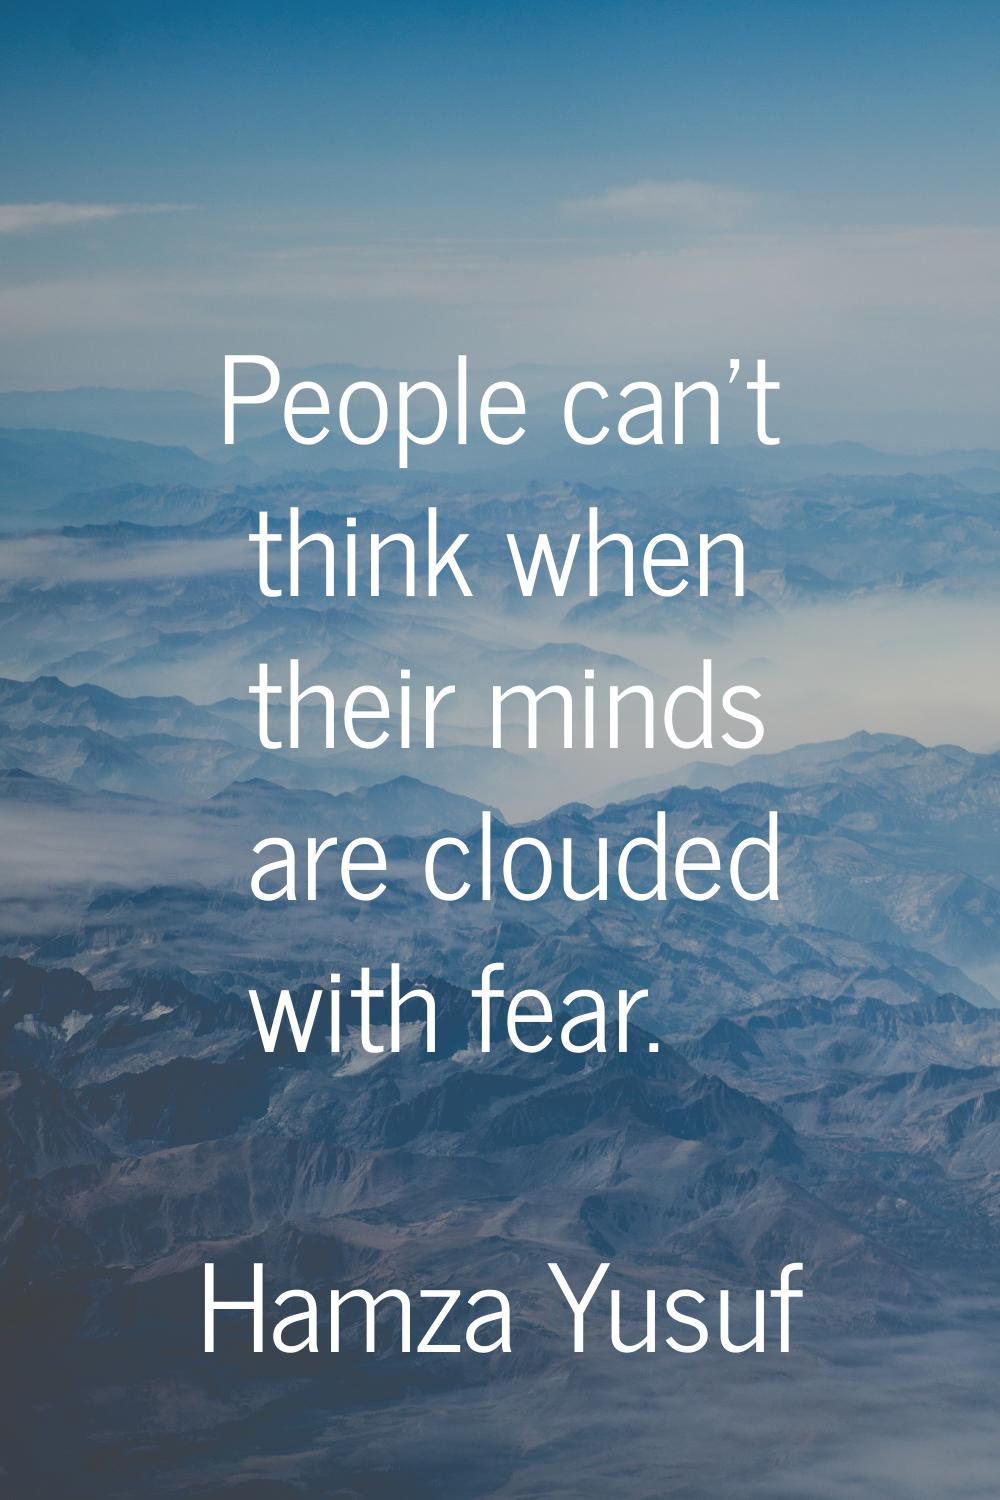 People can't think when their minds are clouded with fear.